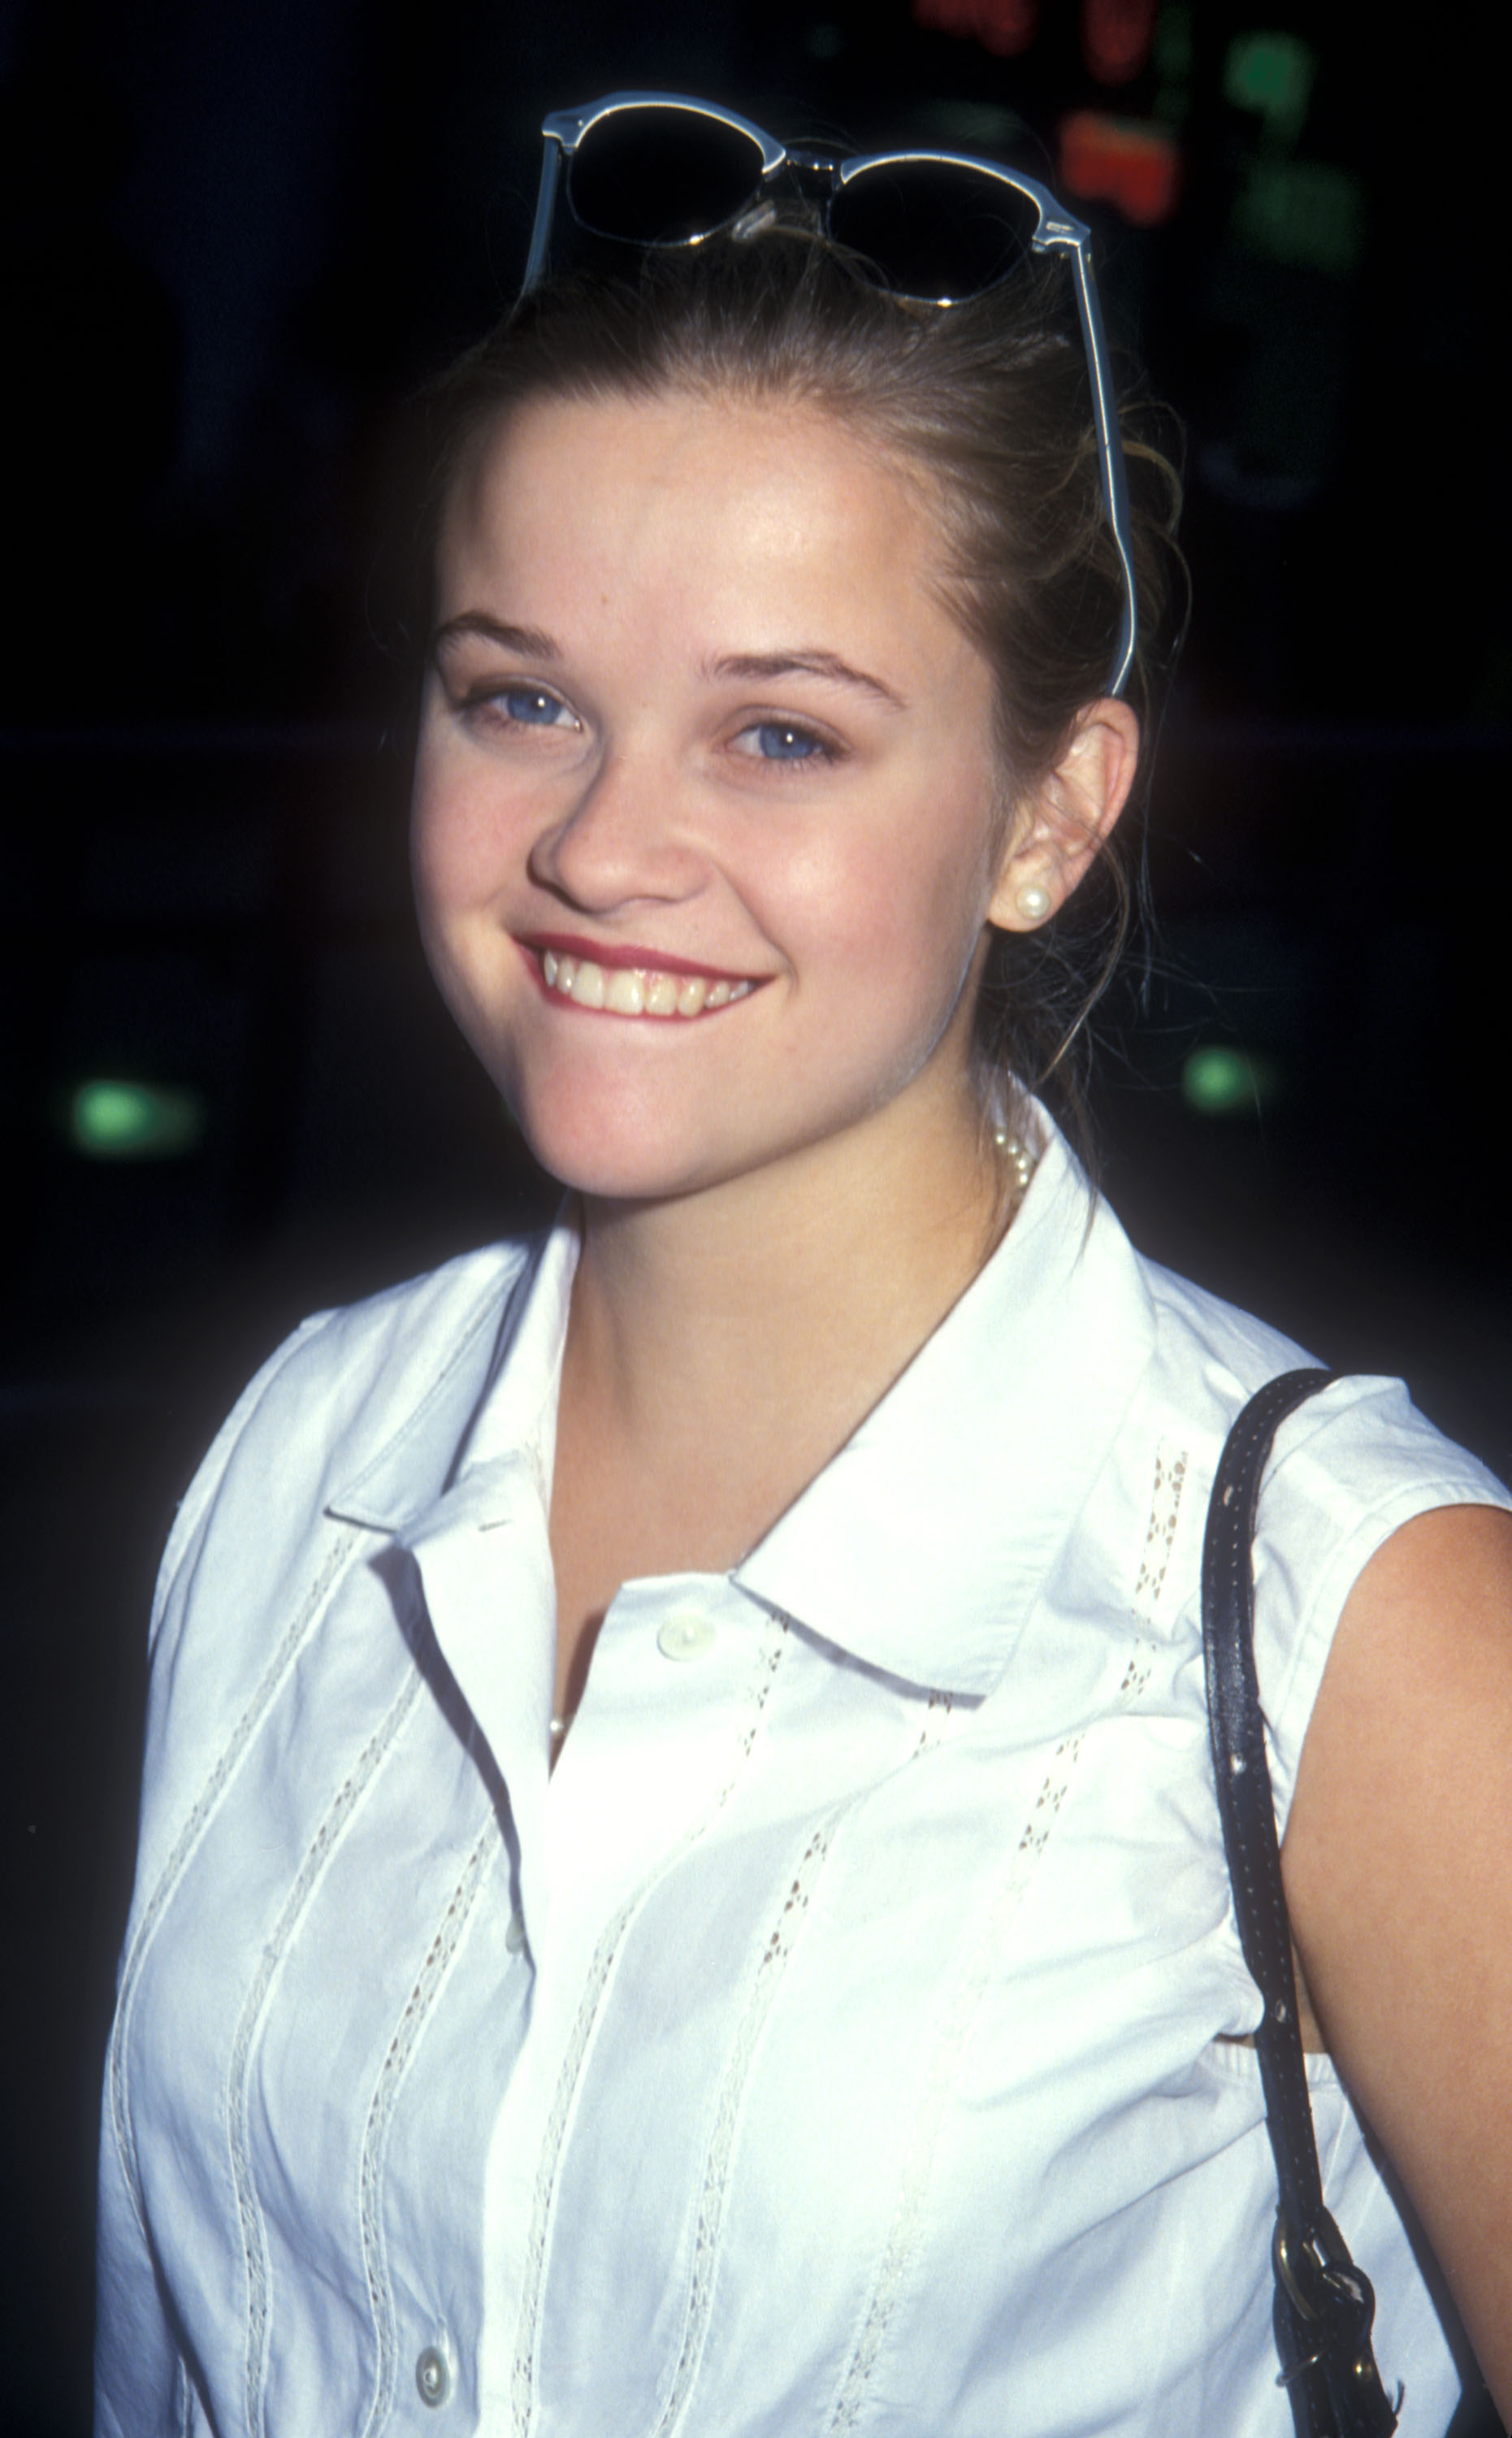 Reese Witherspoon in Los Angeles, California, on January 1, 1993 | Source: Getty Image